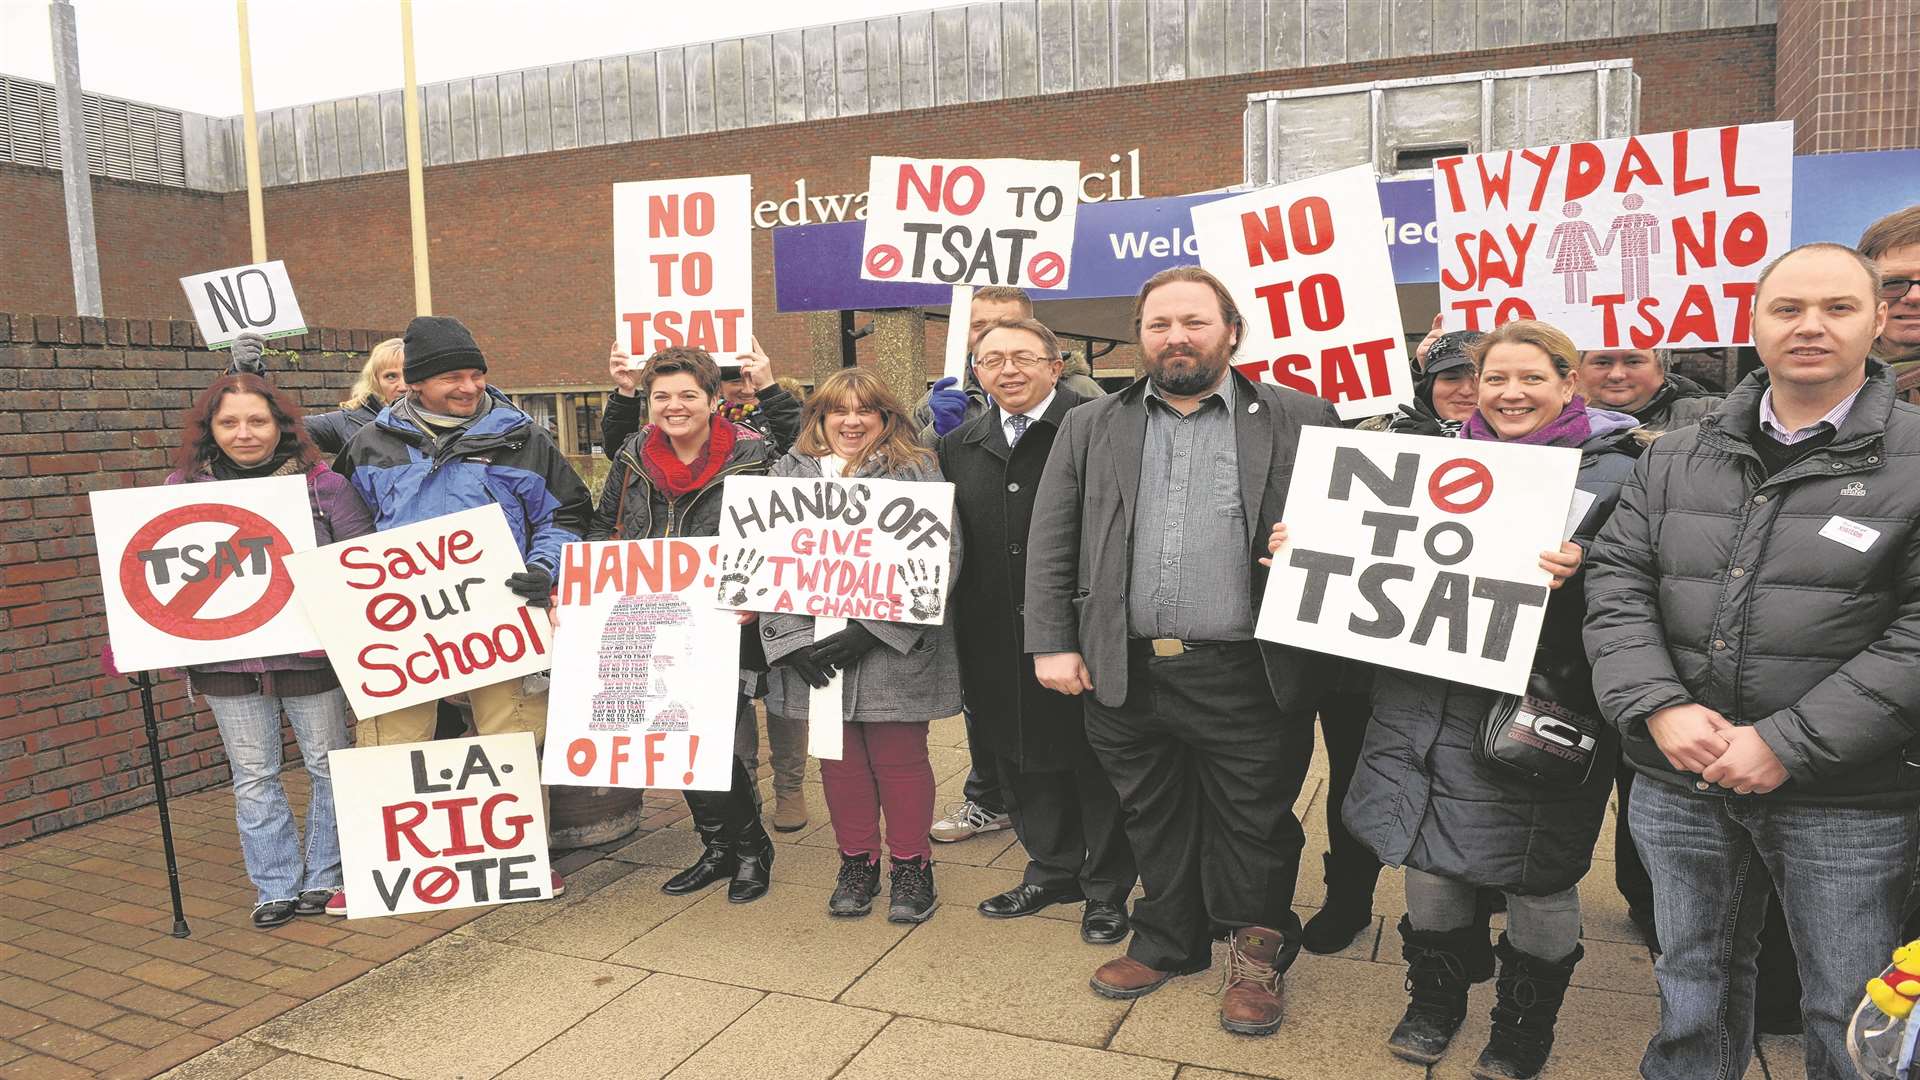 Parents against the takeover did not believe that TSAT was the best option for the primary school.